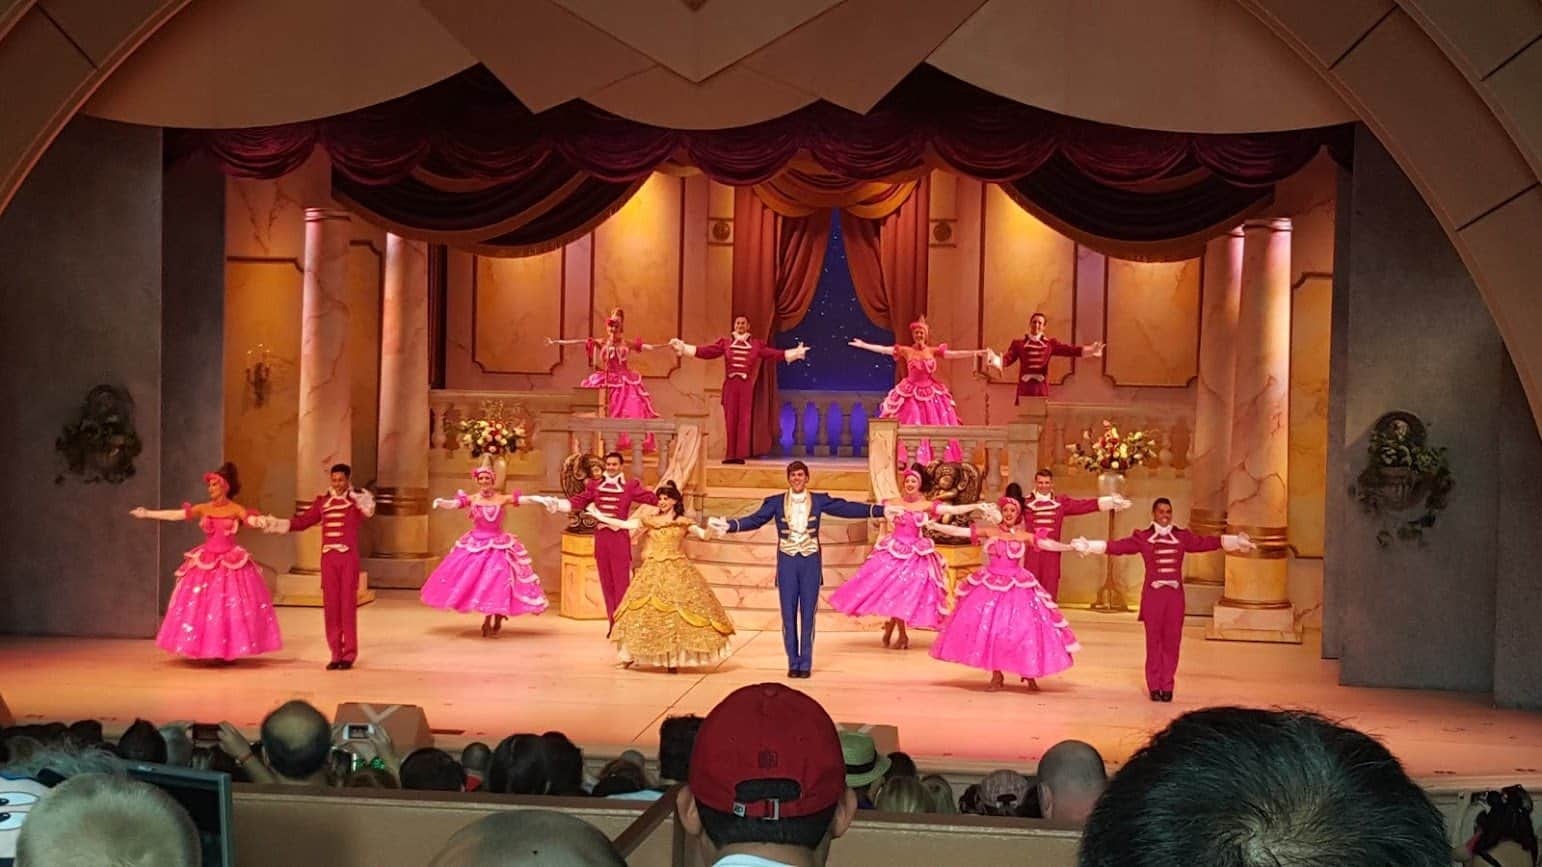 Changes to Disney World Stage shows